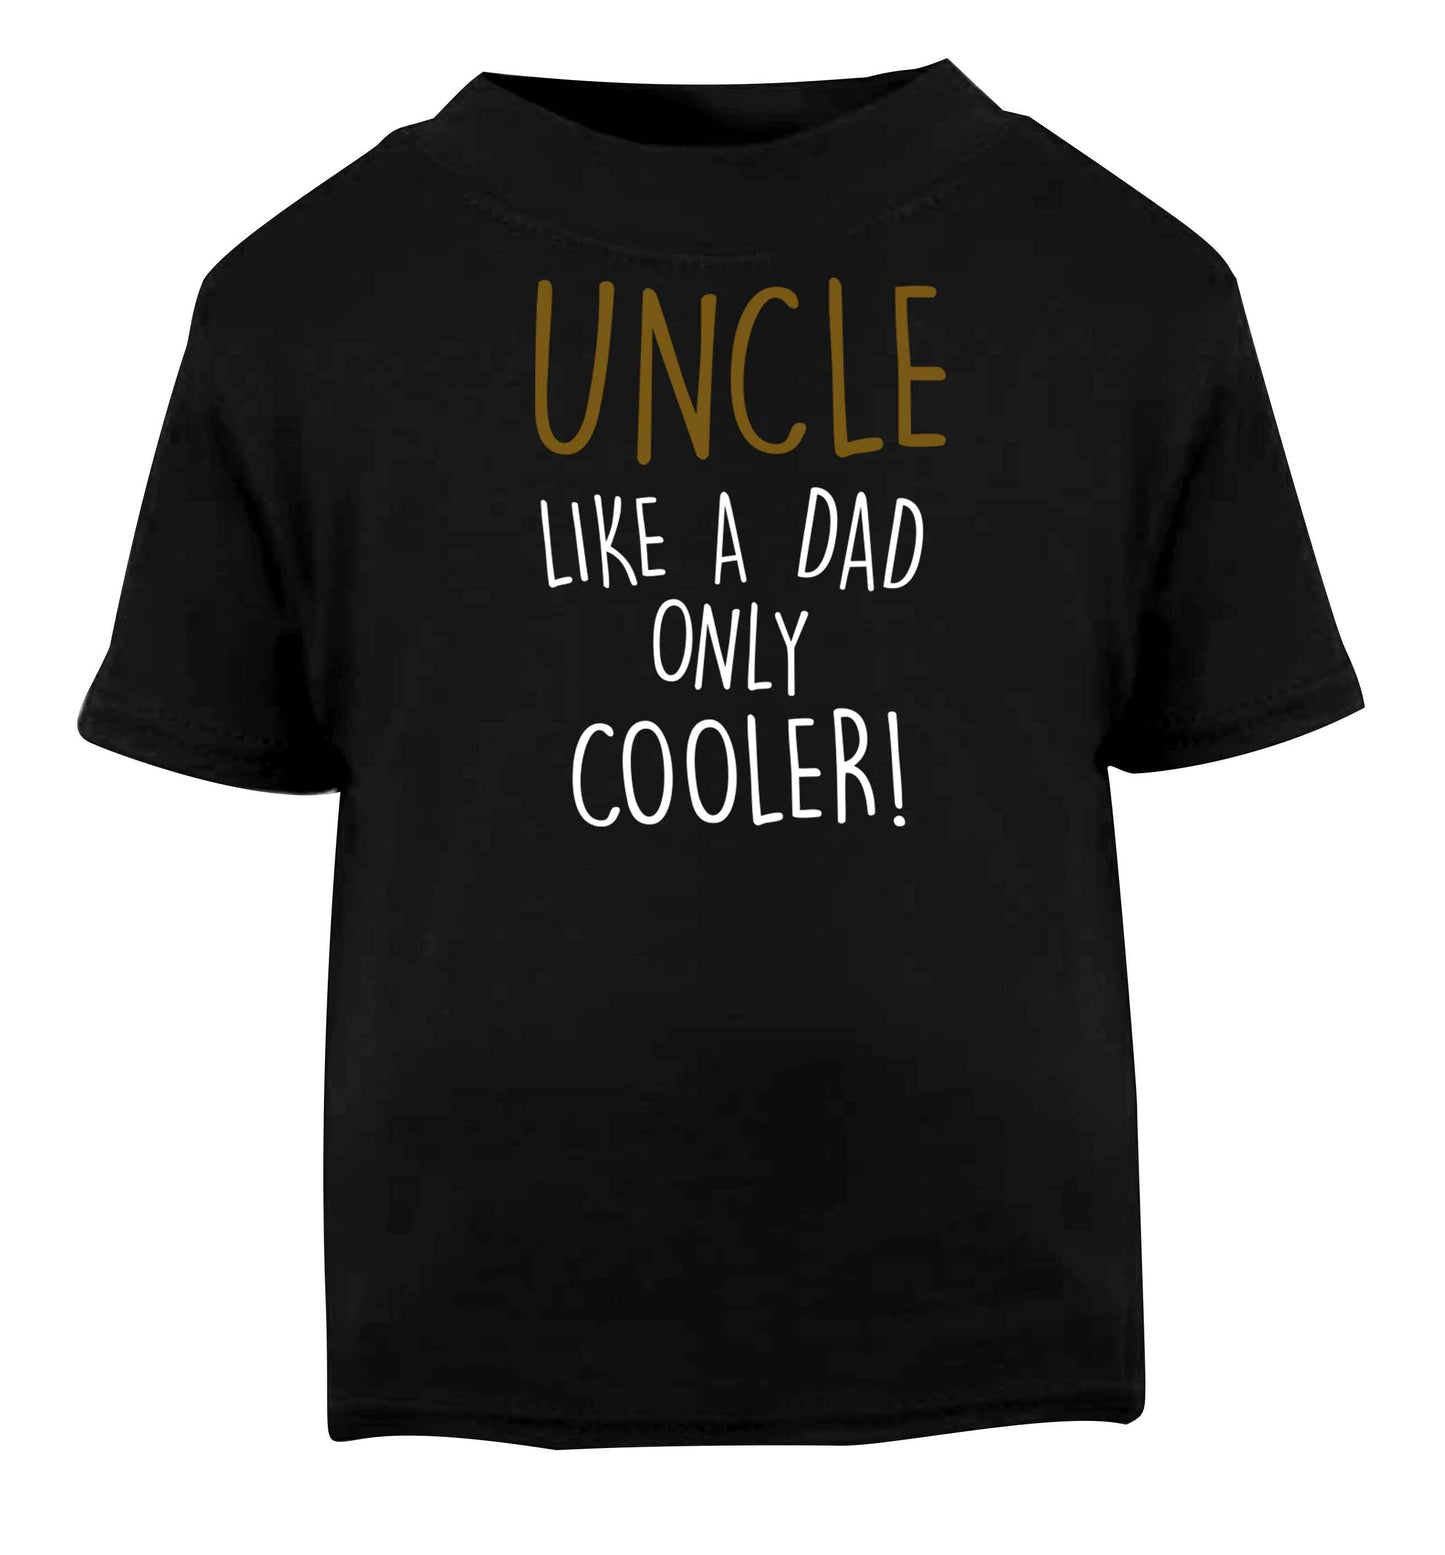 Uncle like a dad only cooler Black baby toddler Tshirt 2 years